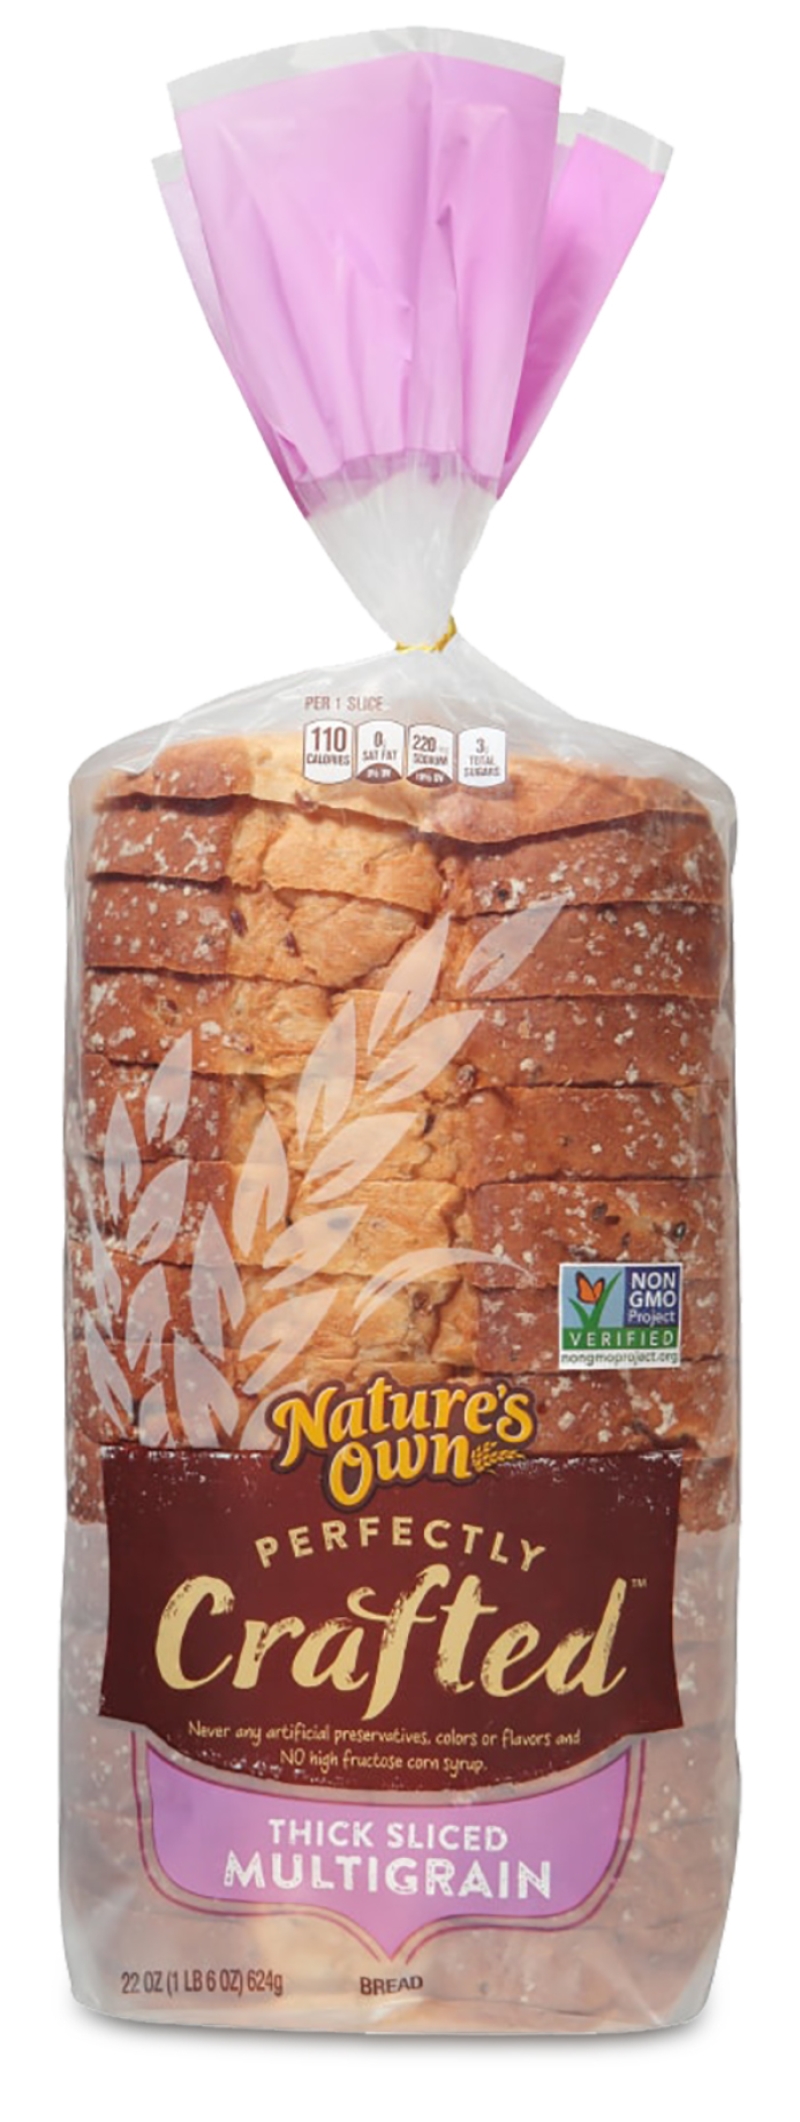 natures Own Perfectly Crafted Thick Sliced Multigrain Bread